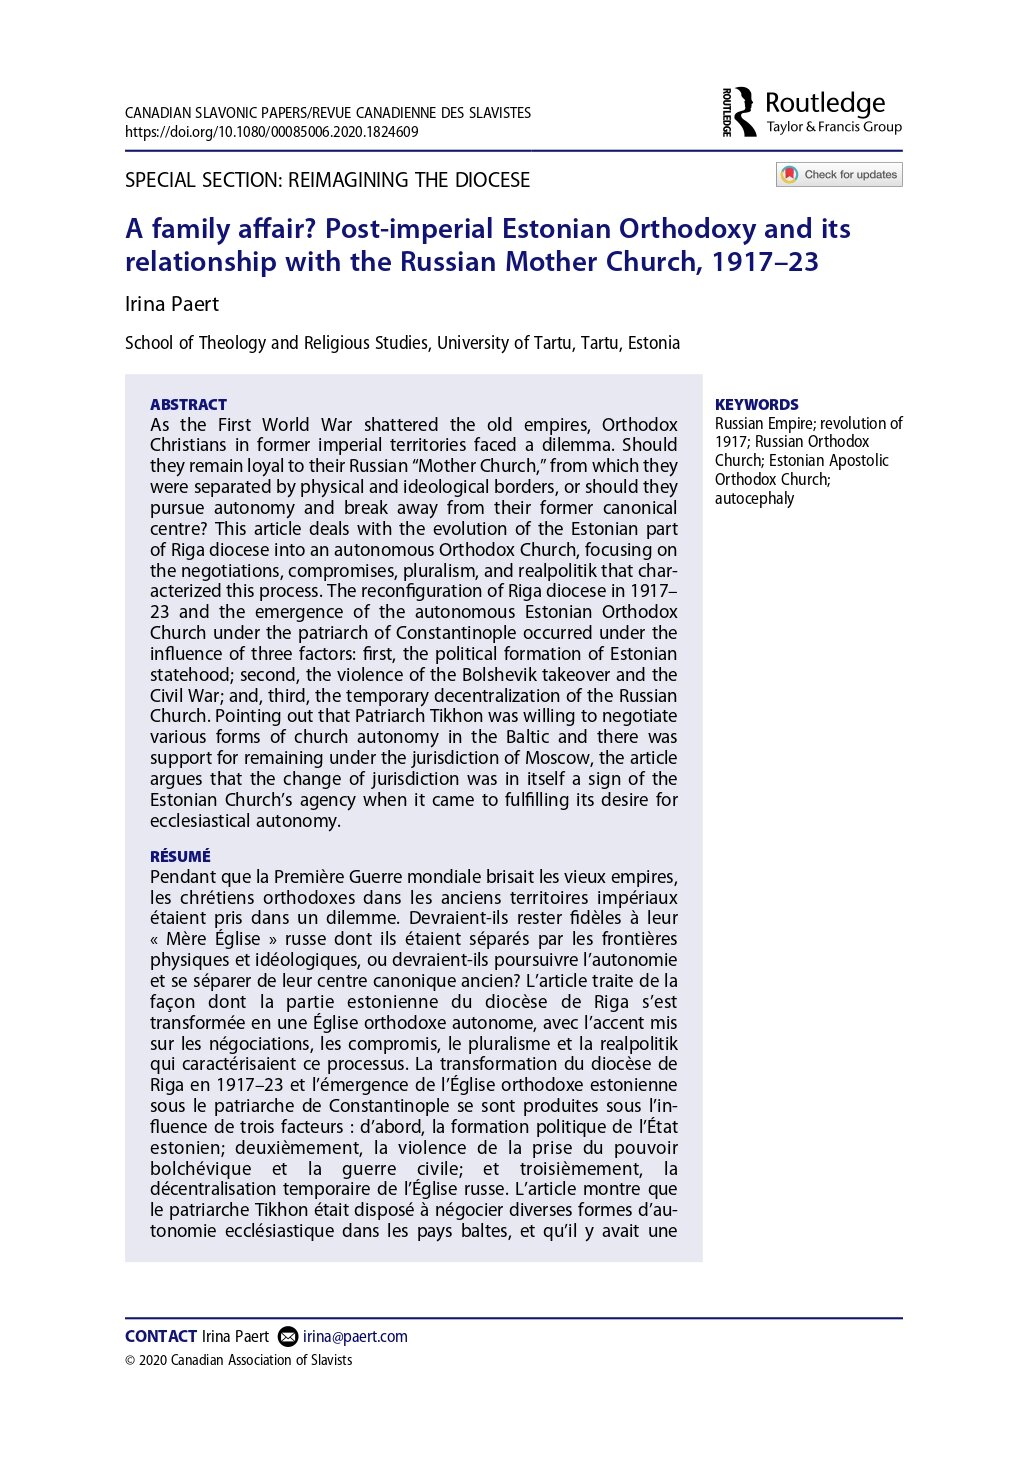 A family affair Post imperial Estonian Orthodoxy and its relationship with the Russian Mother Church 1917 23_pages-to-jpg-0002.jpg